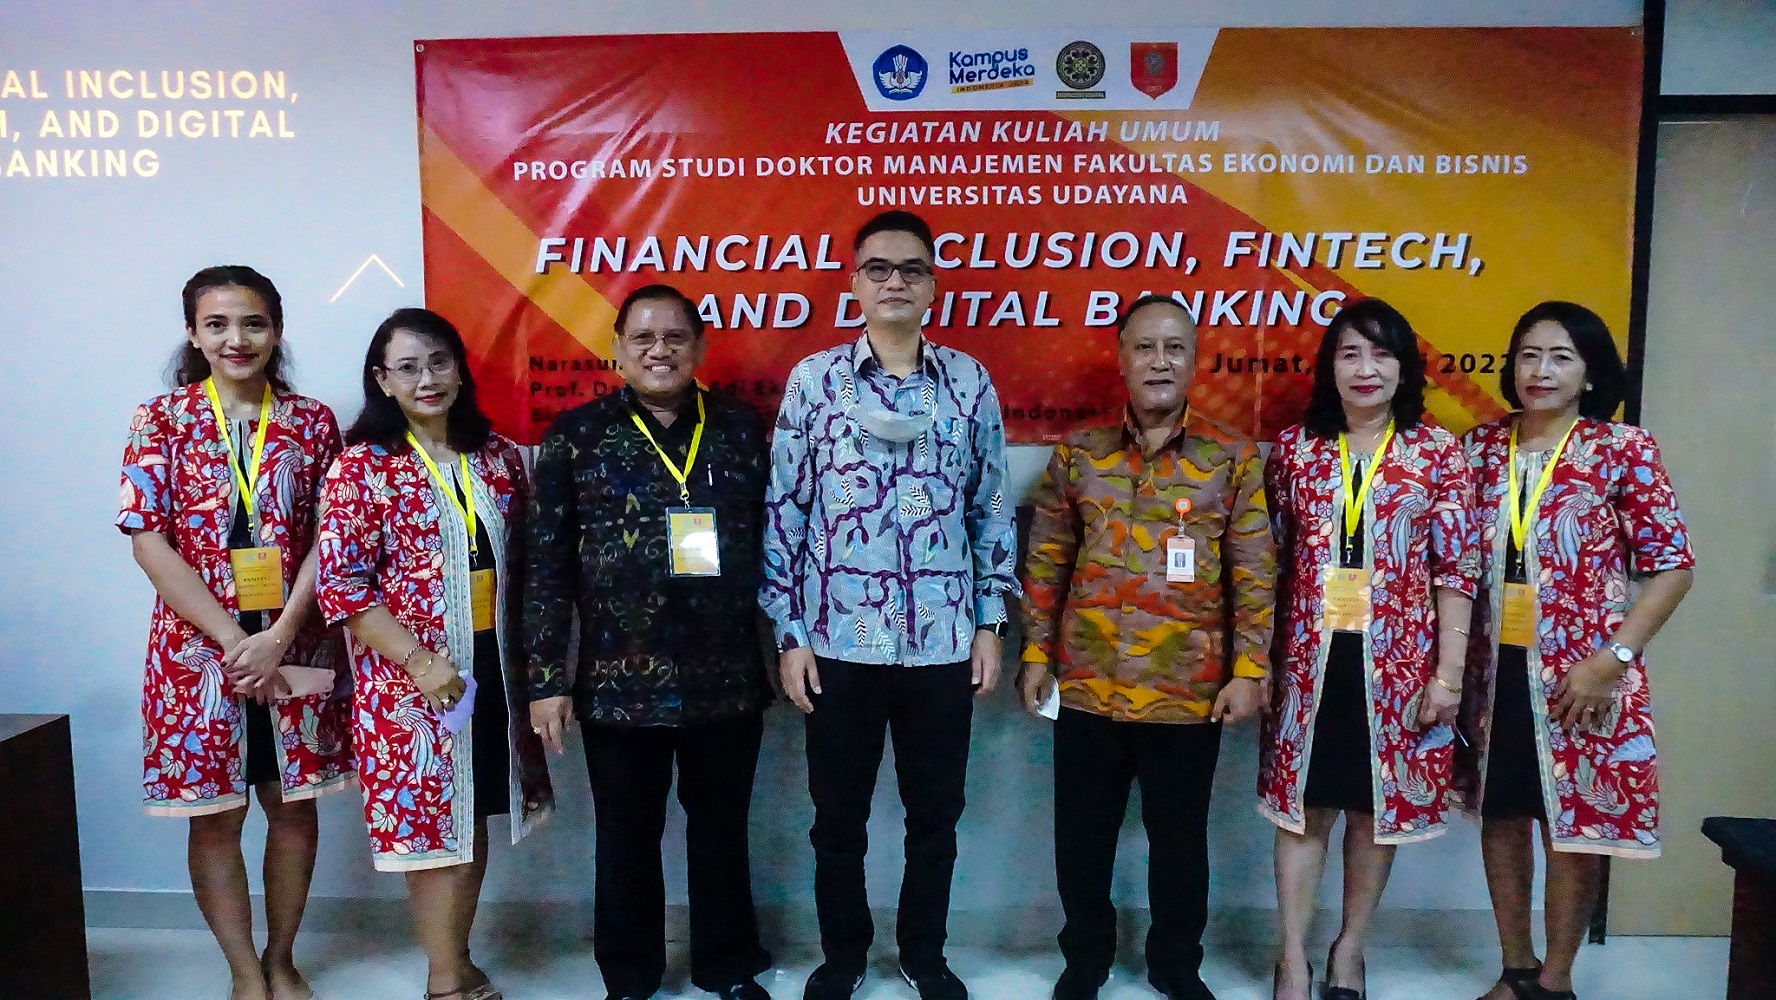 GENERAL LECTURE ACTIVITIES DOCTORAL STUDY PROGRAM OF MANAGEMENT, FINANCIAL INCLUSION, FINTECH, AND DIGITAL BANKING FEB UNUD